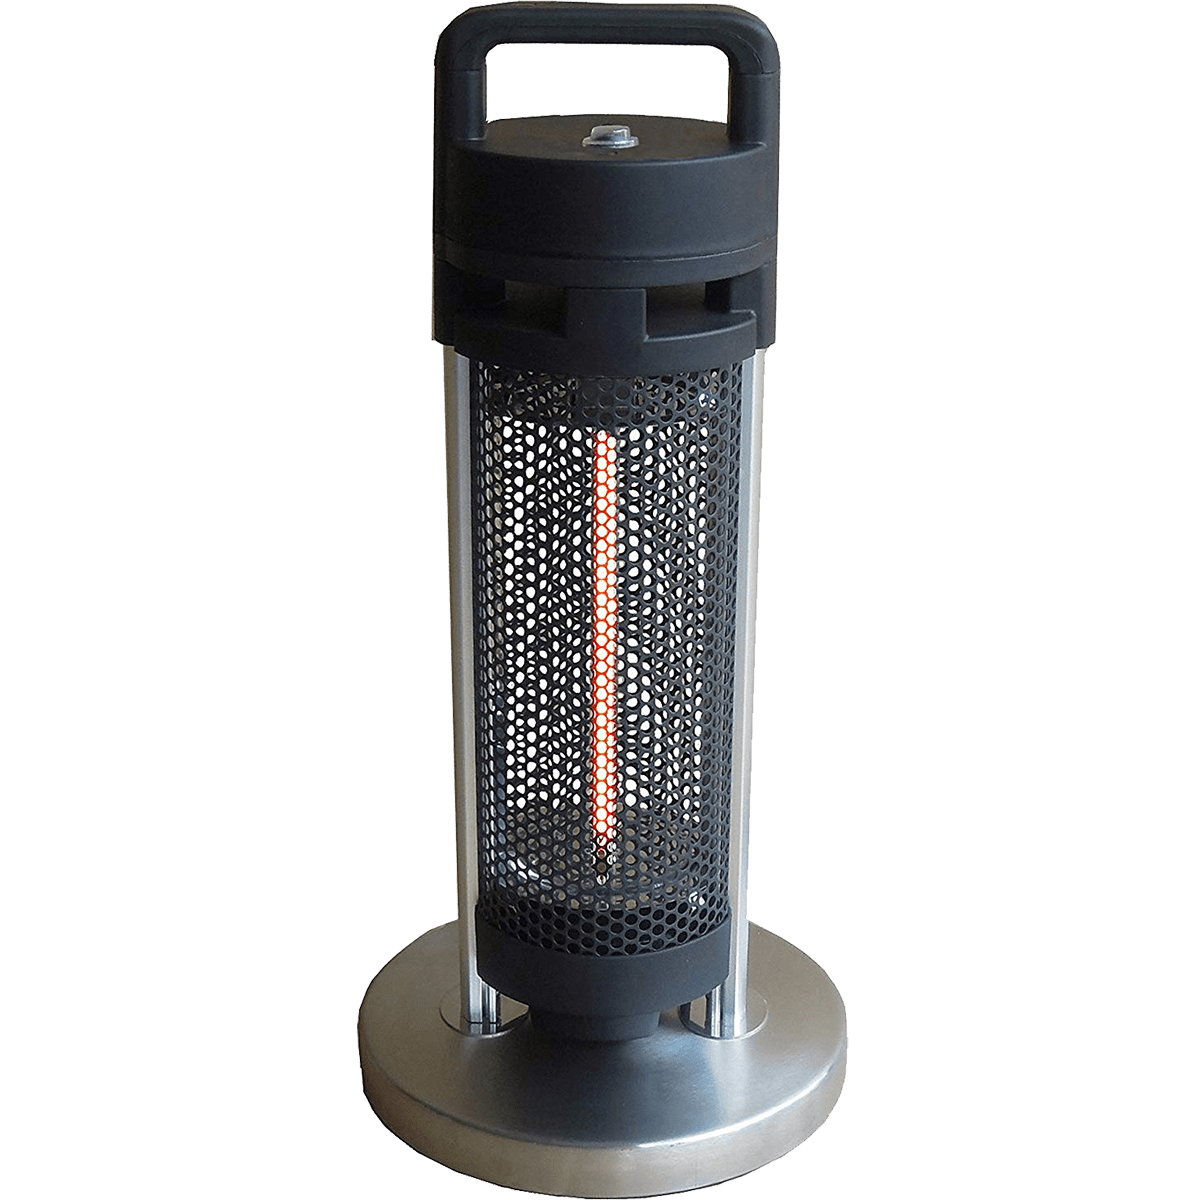 Ener-G+ Infrared Portable Under-Table Electric Heater Model: HEA-20960-D